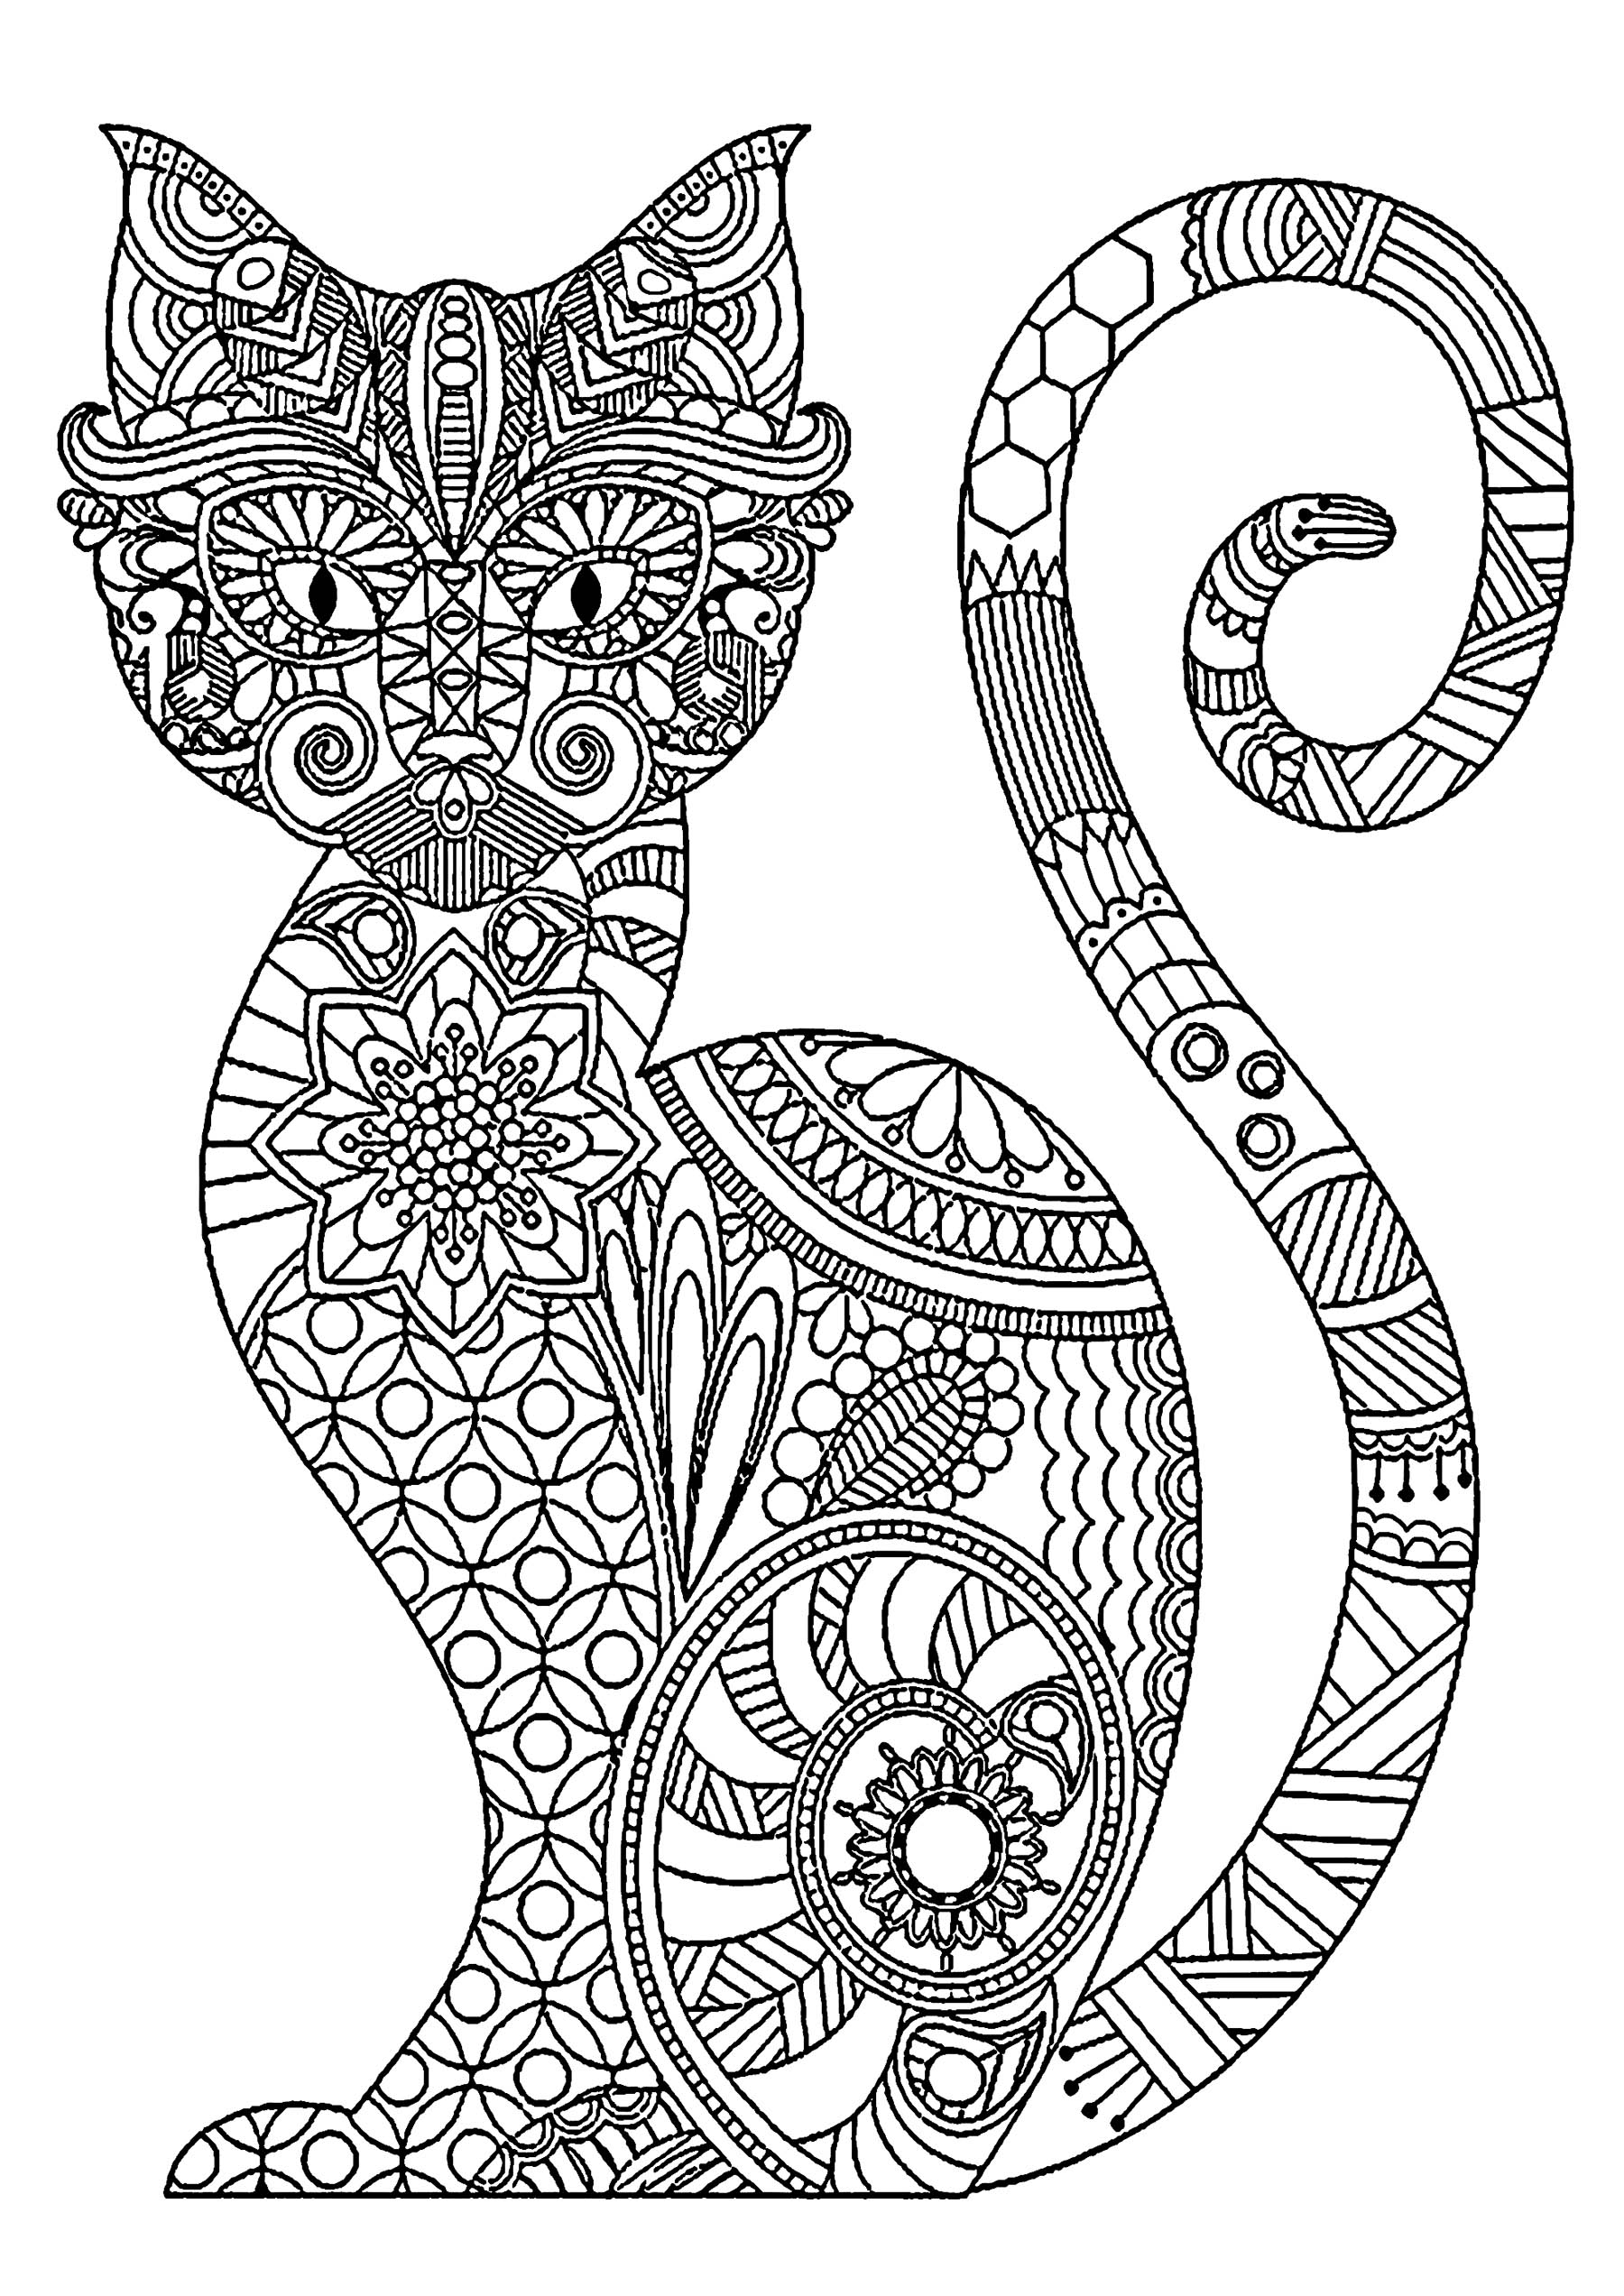 Download Cat free to color for kids : Cat with patterns - Cats Kids Coloring Pages